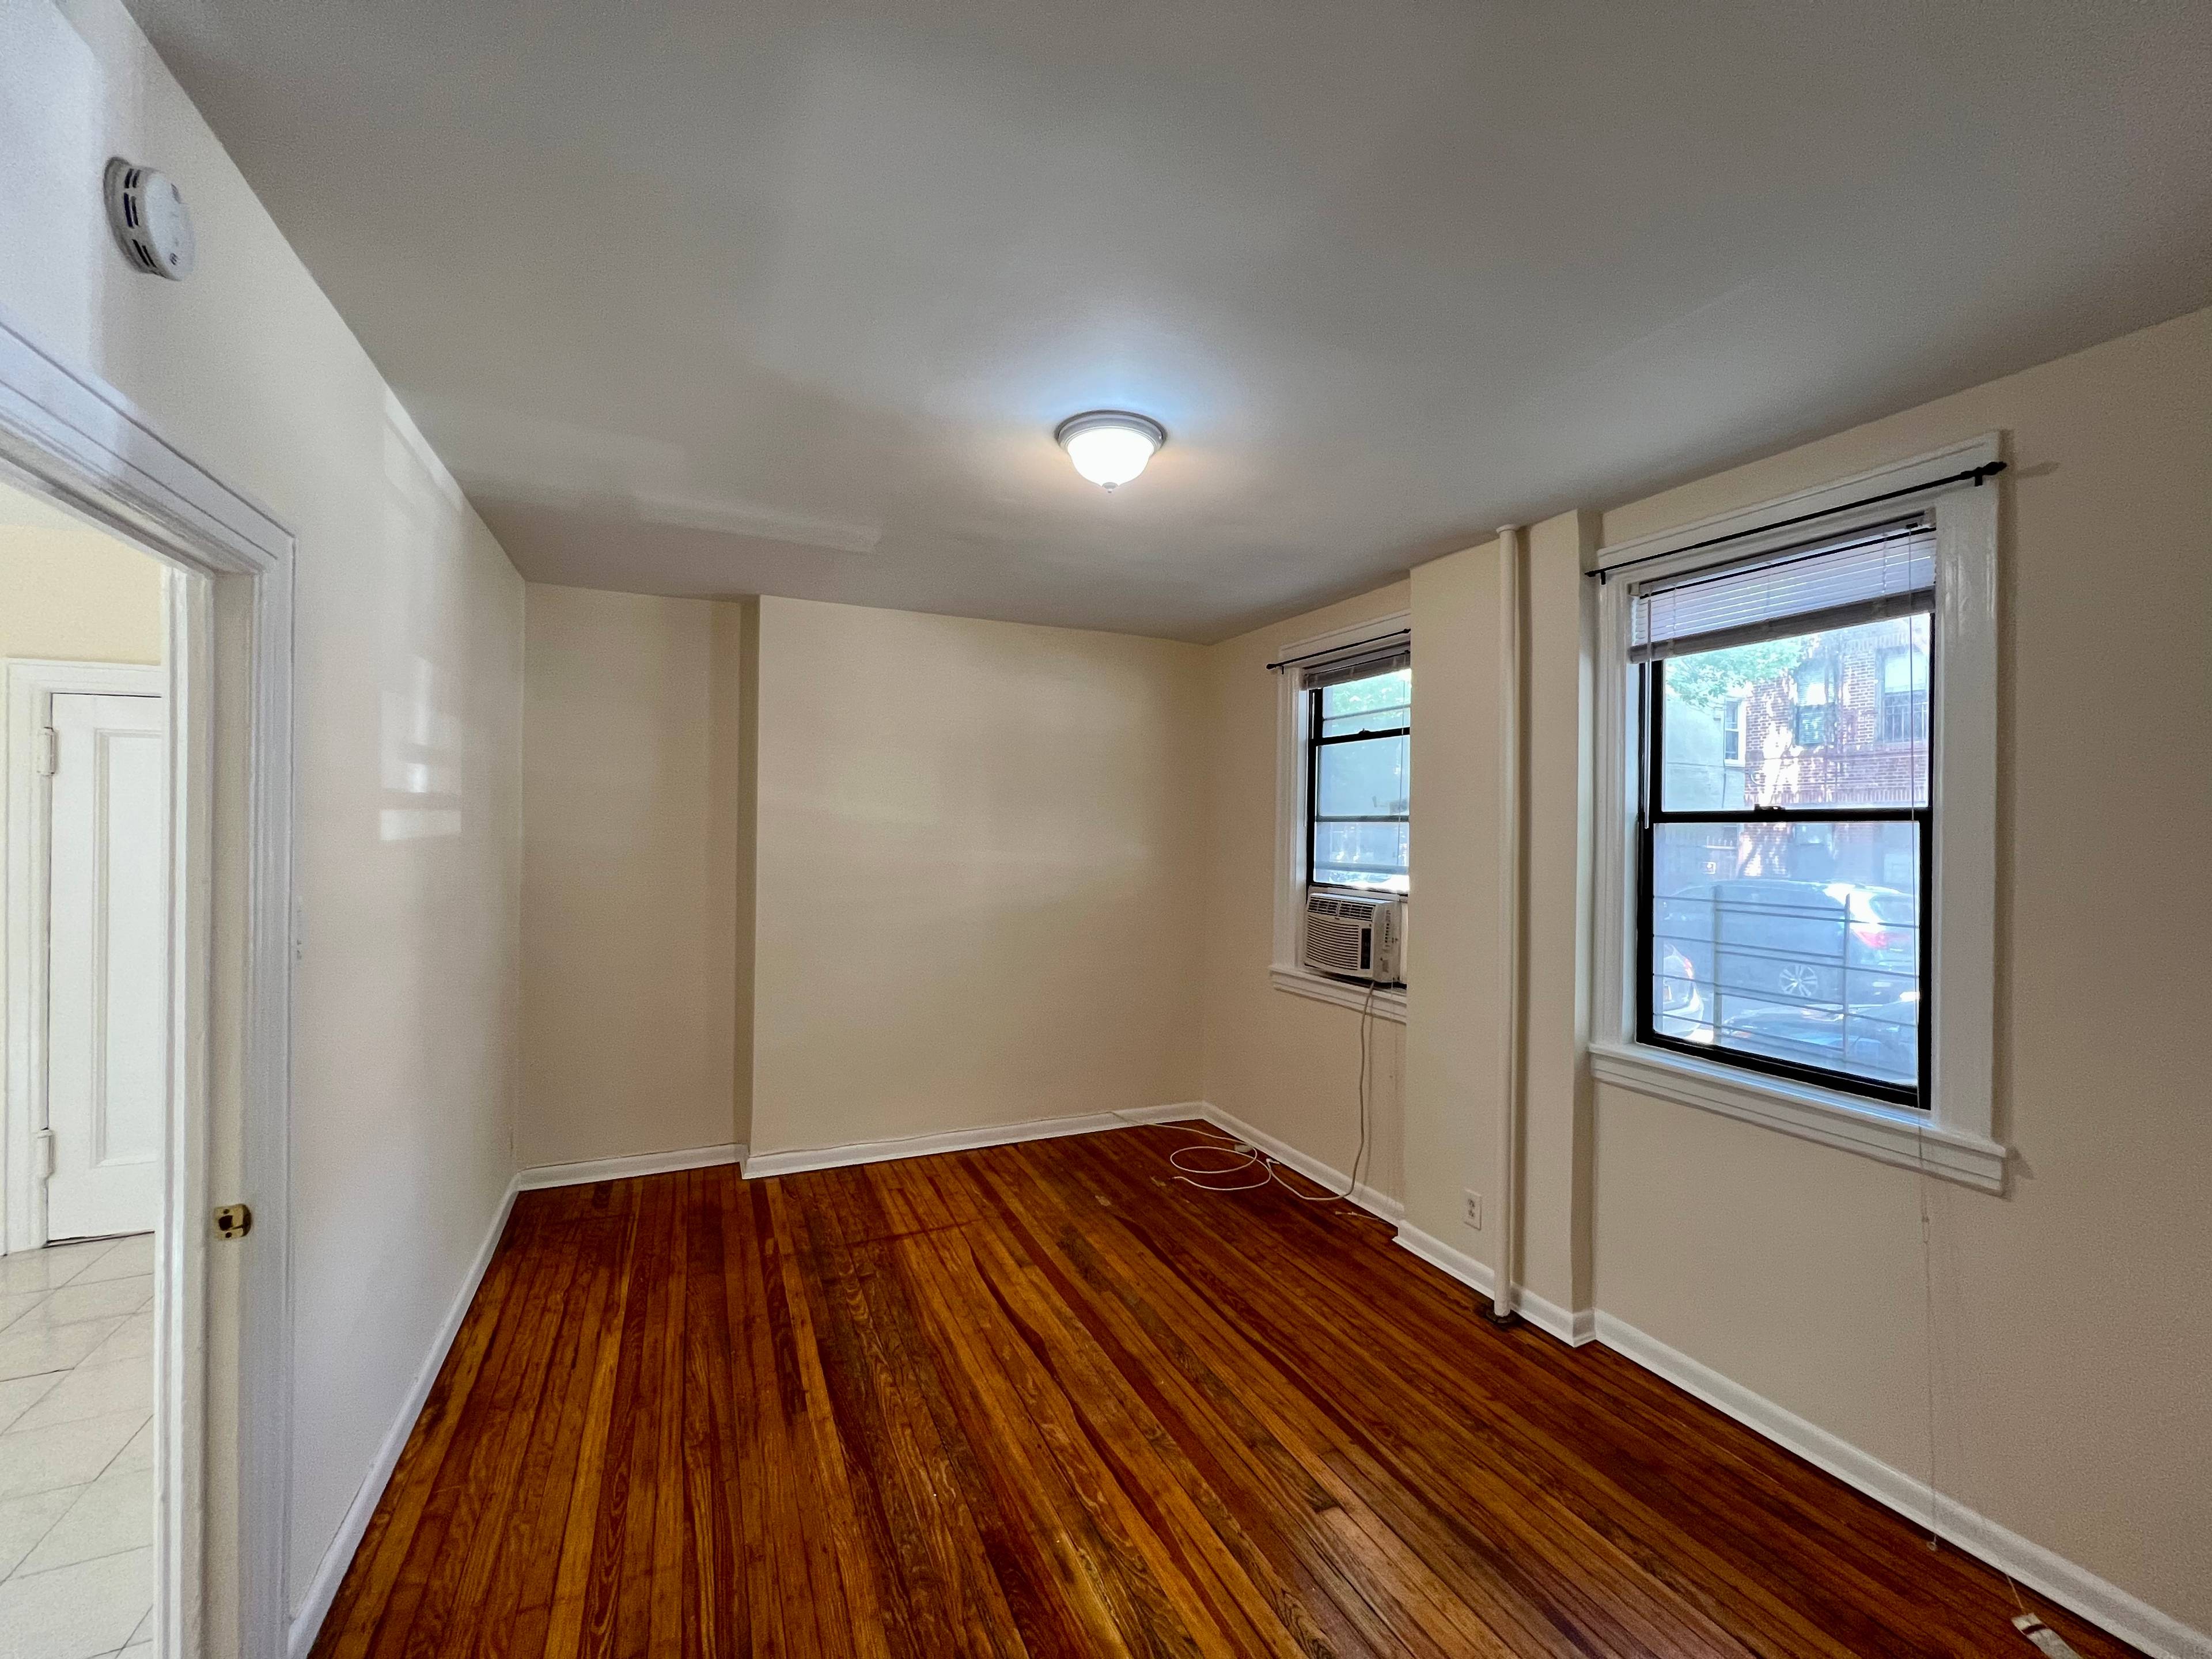 Astoria/LIC: 1 Bedroom Apartment For Lease in the 